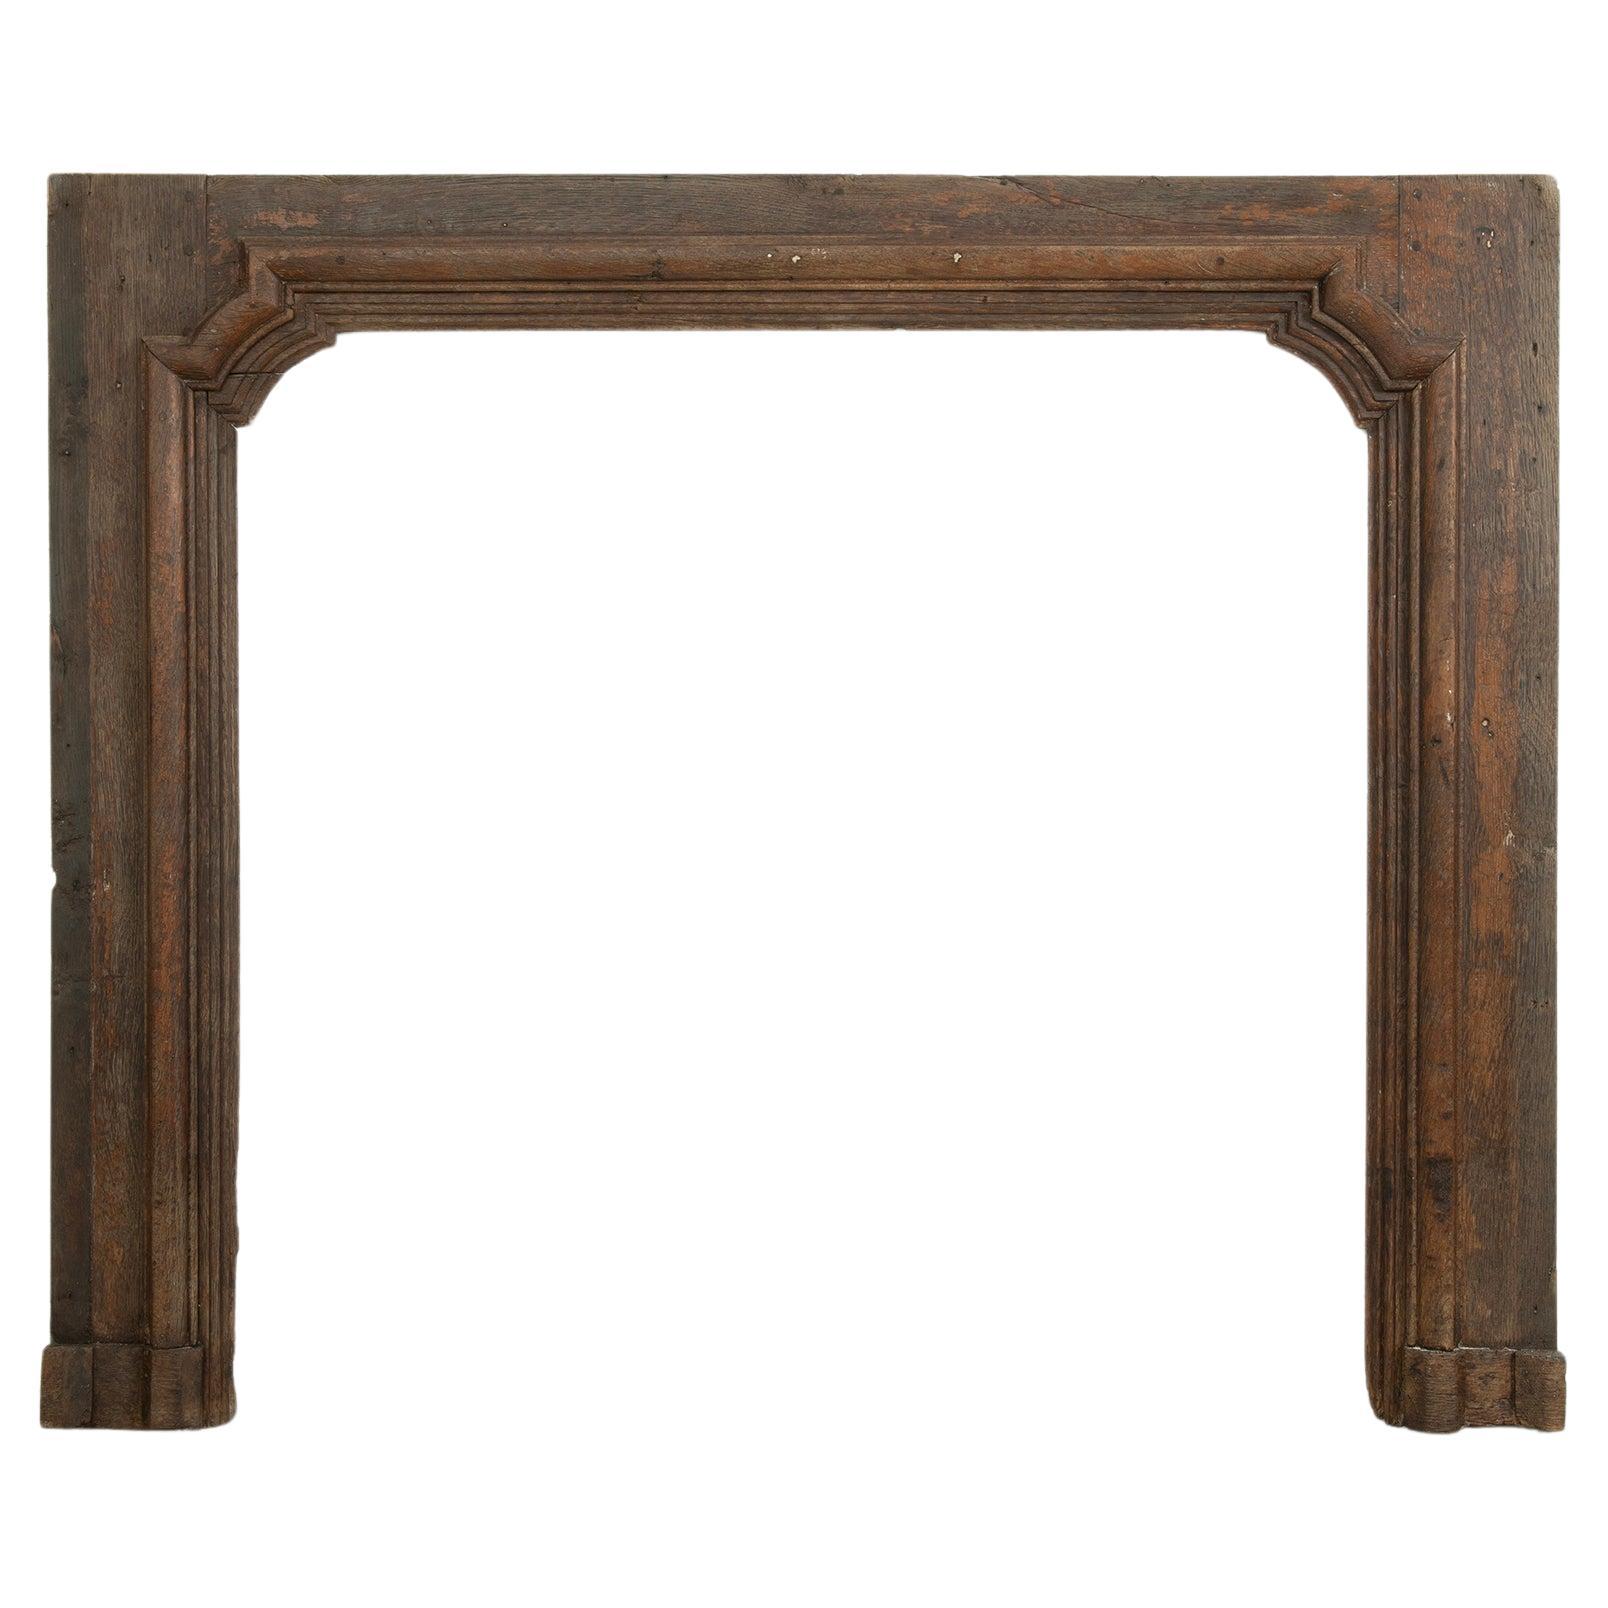 Antique Wooden Fireplace For Sale